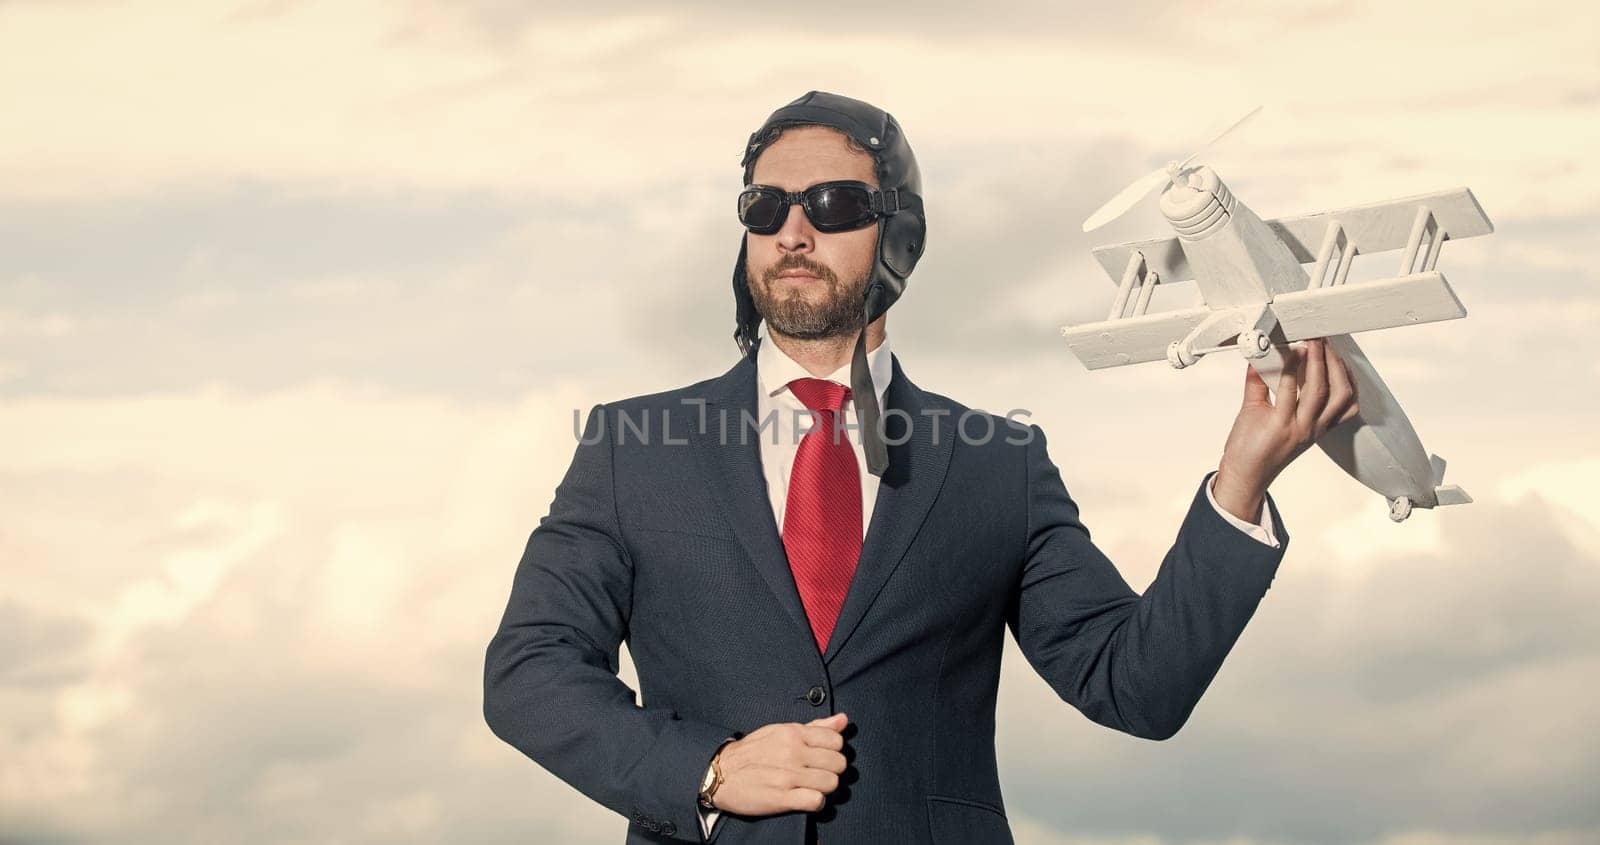 businessman in suit and pilot hat launch plane toy.